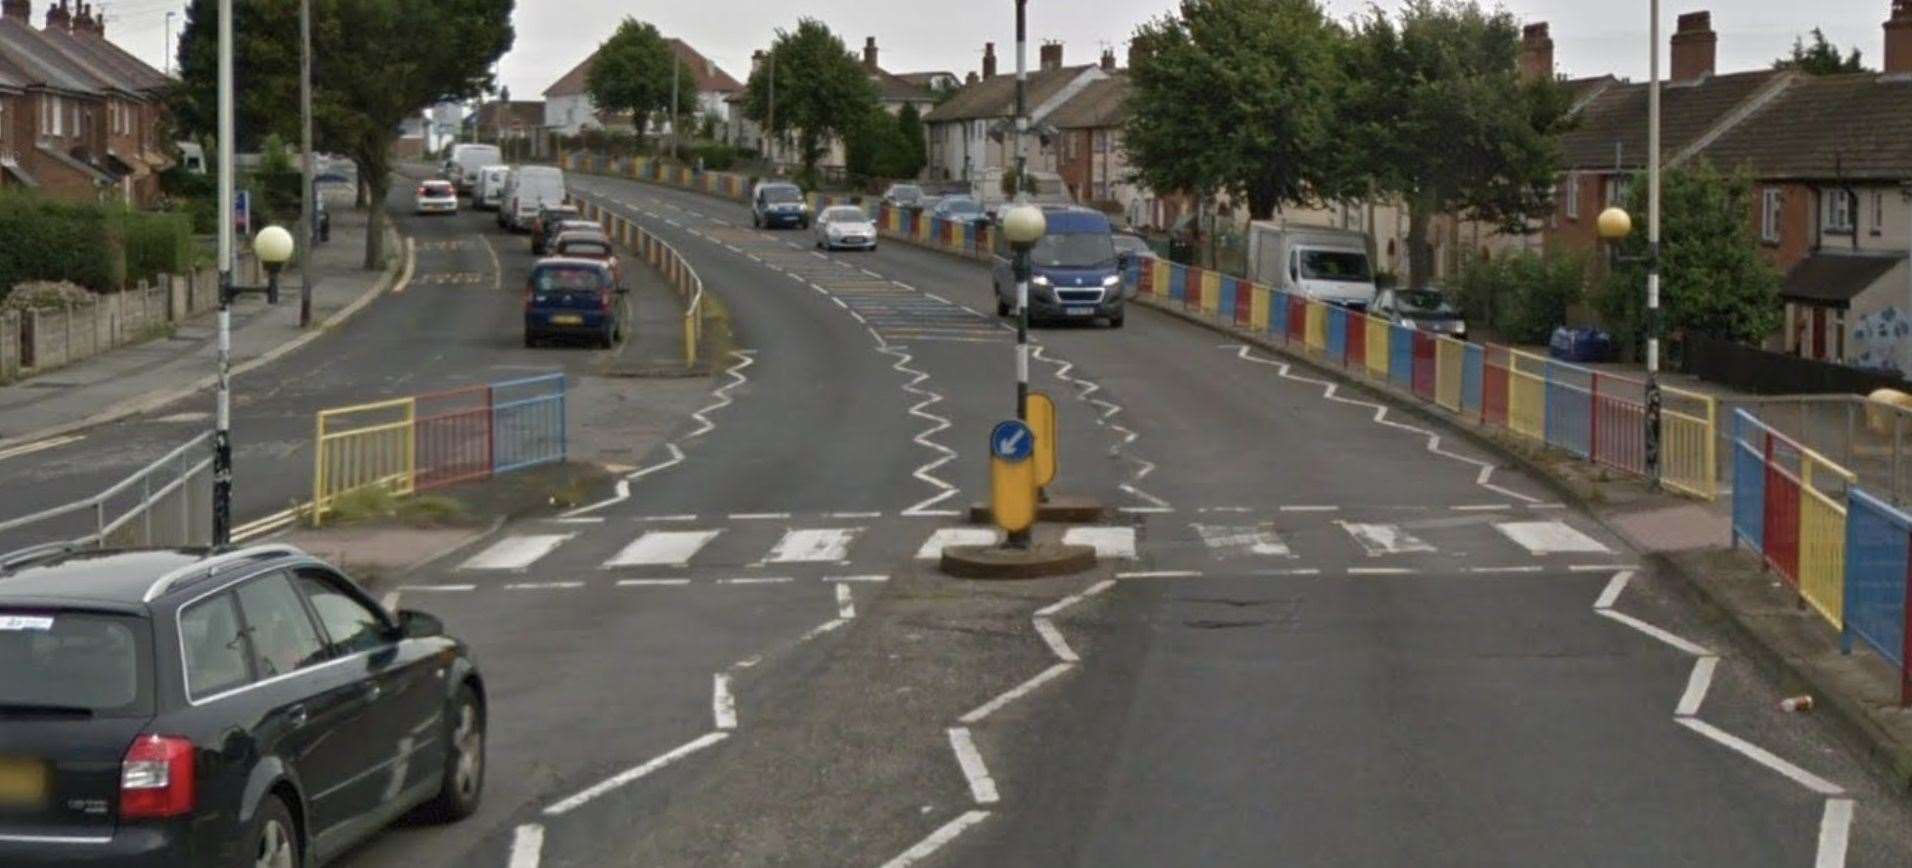 A child was taken to hospital after being knocked down by a car on Hill Road, Folkestone. Picture: Google